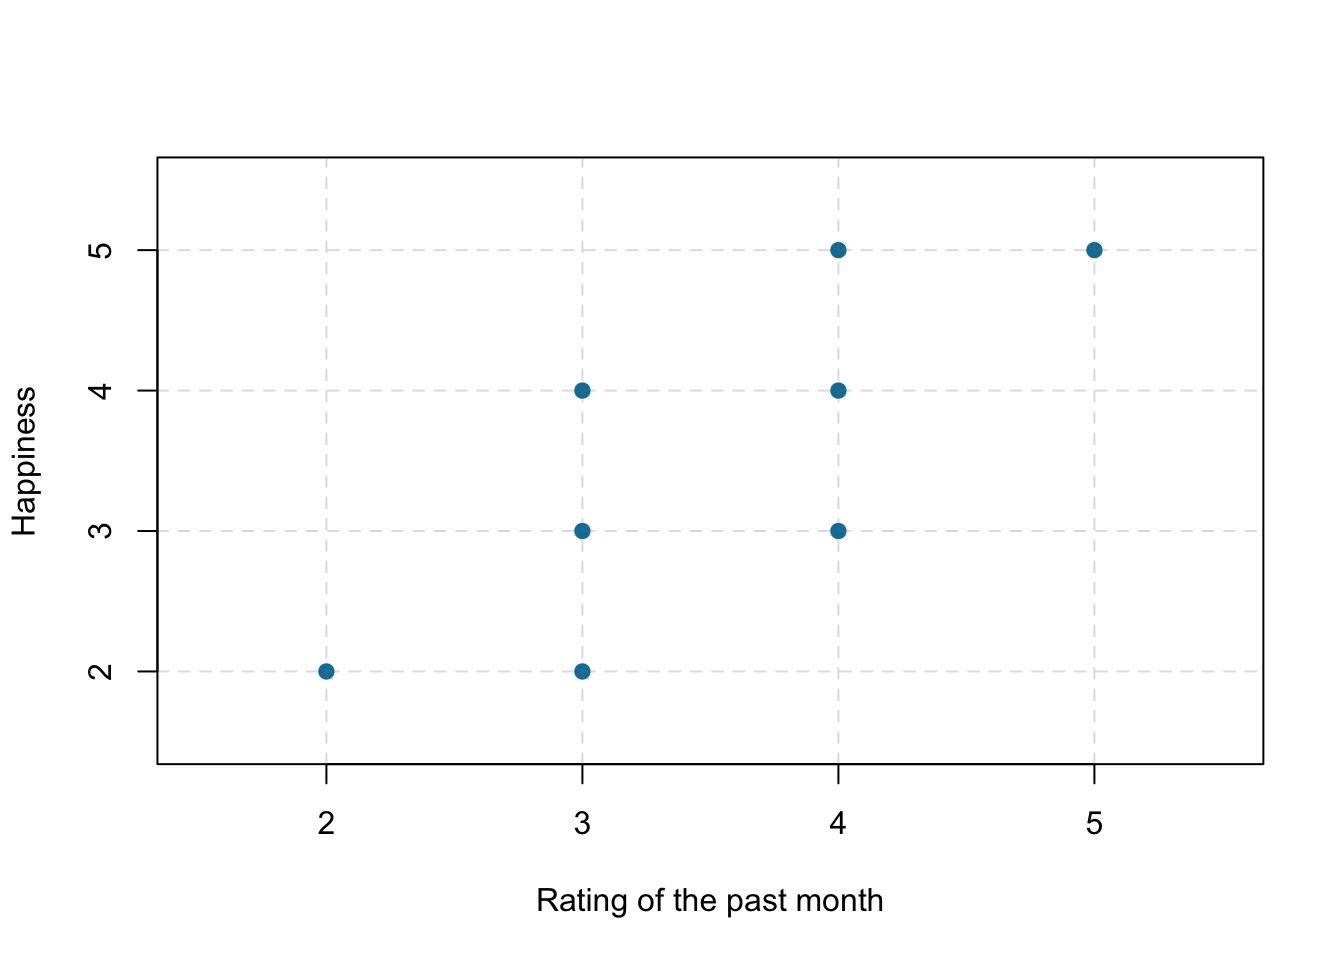 Scatterplot of the association between happiness and ratings of the past month, a positive correlation (*r* = .81). Each dot represents an individual.